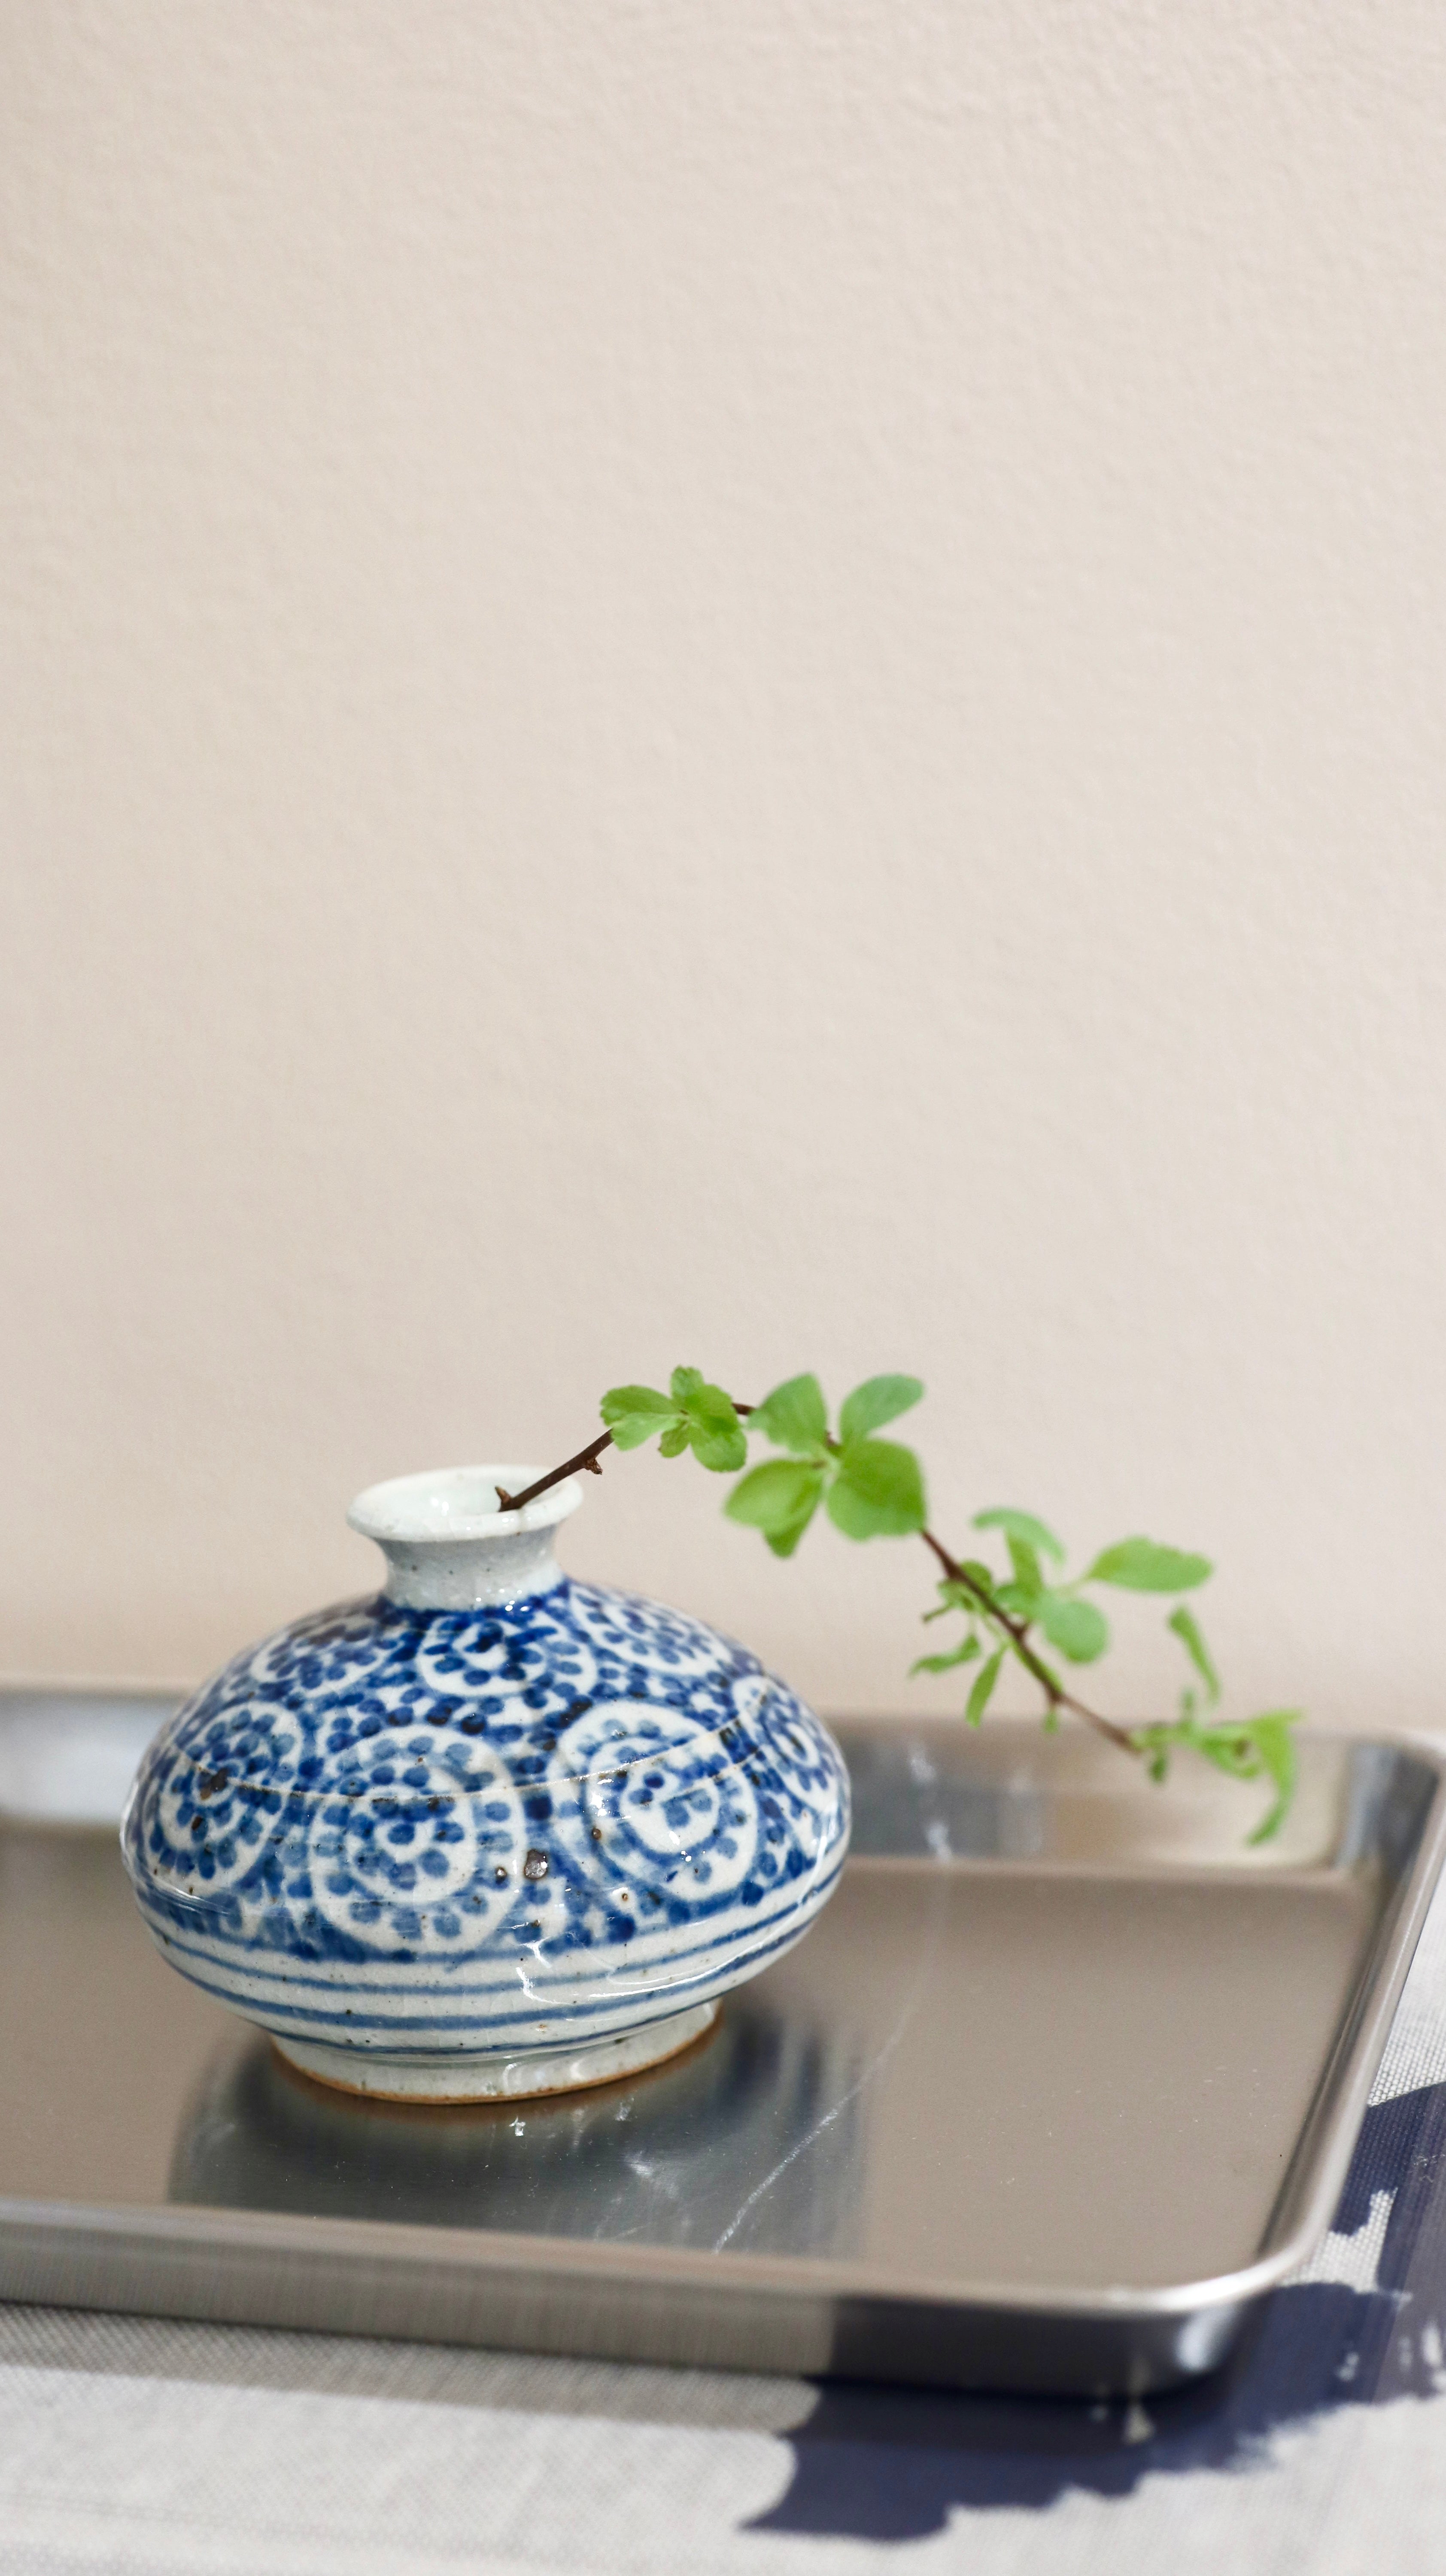 Small Japanese vase with pattern